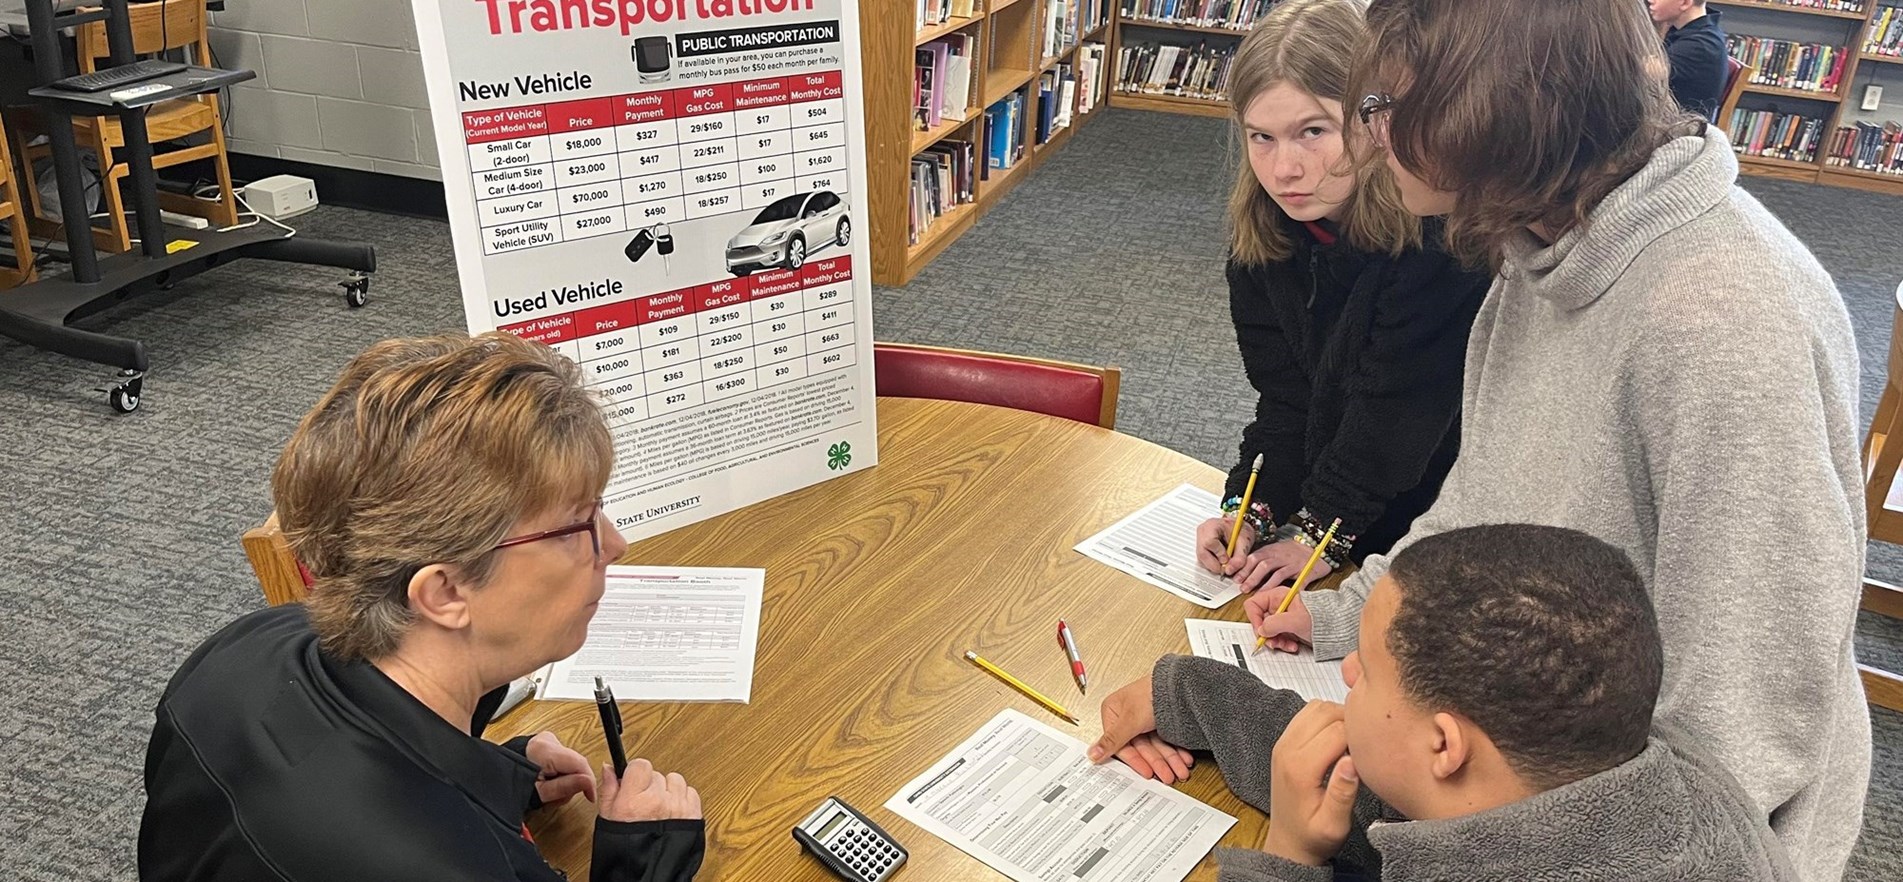 Three students consult with volunteer about transportation costs during consumer education event in JMS Media Center.